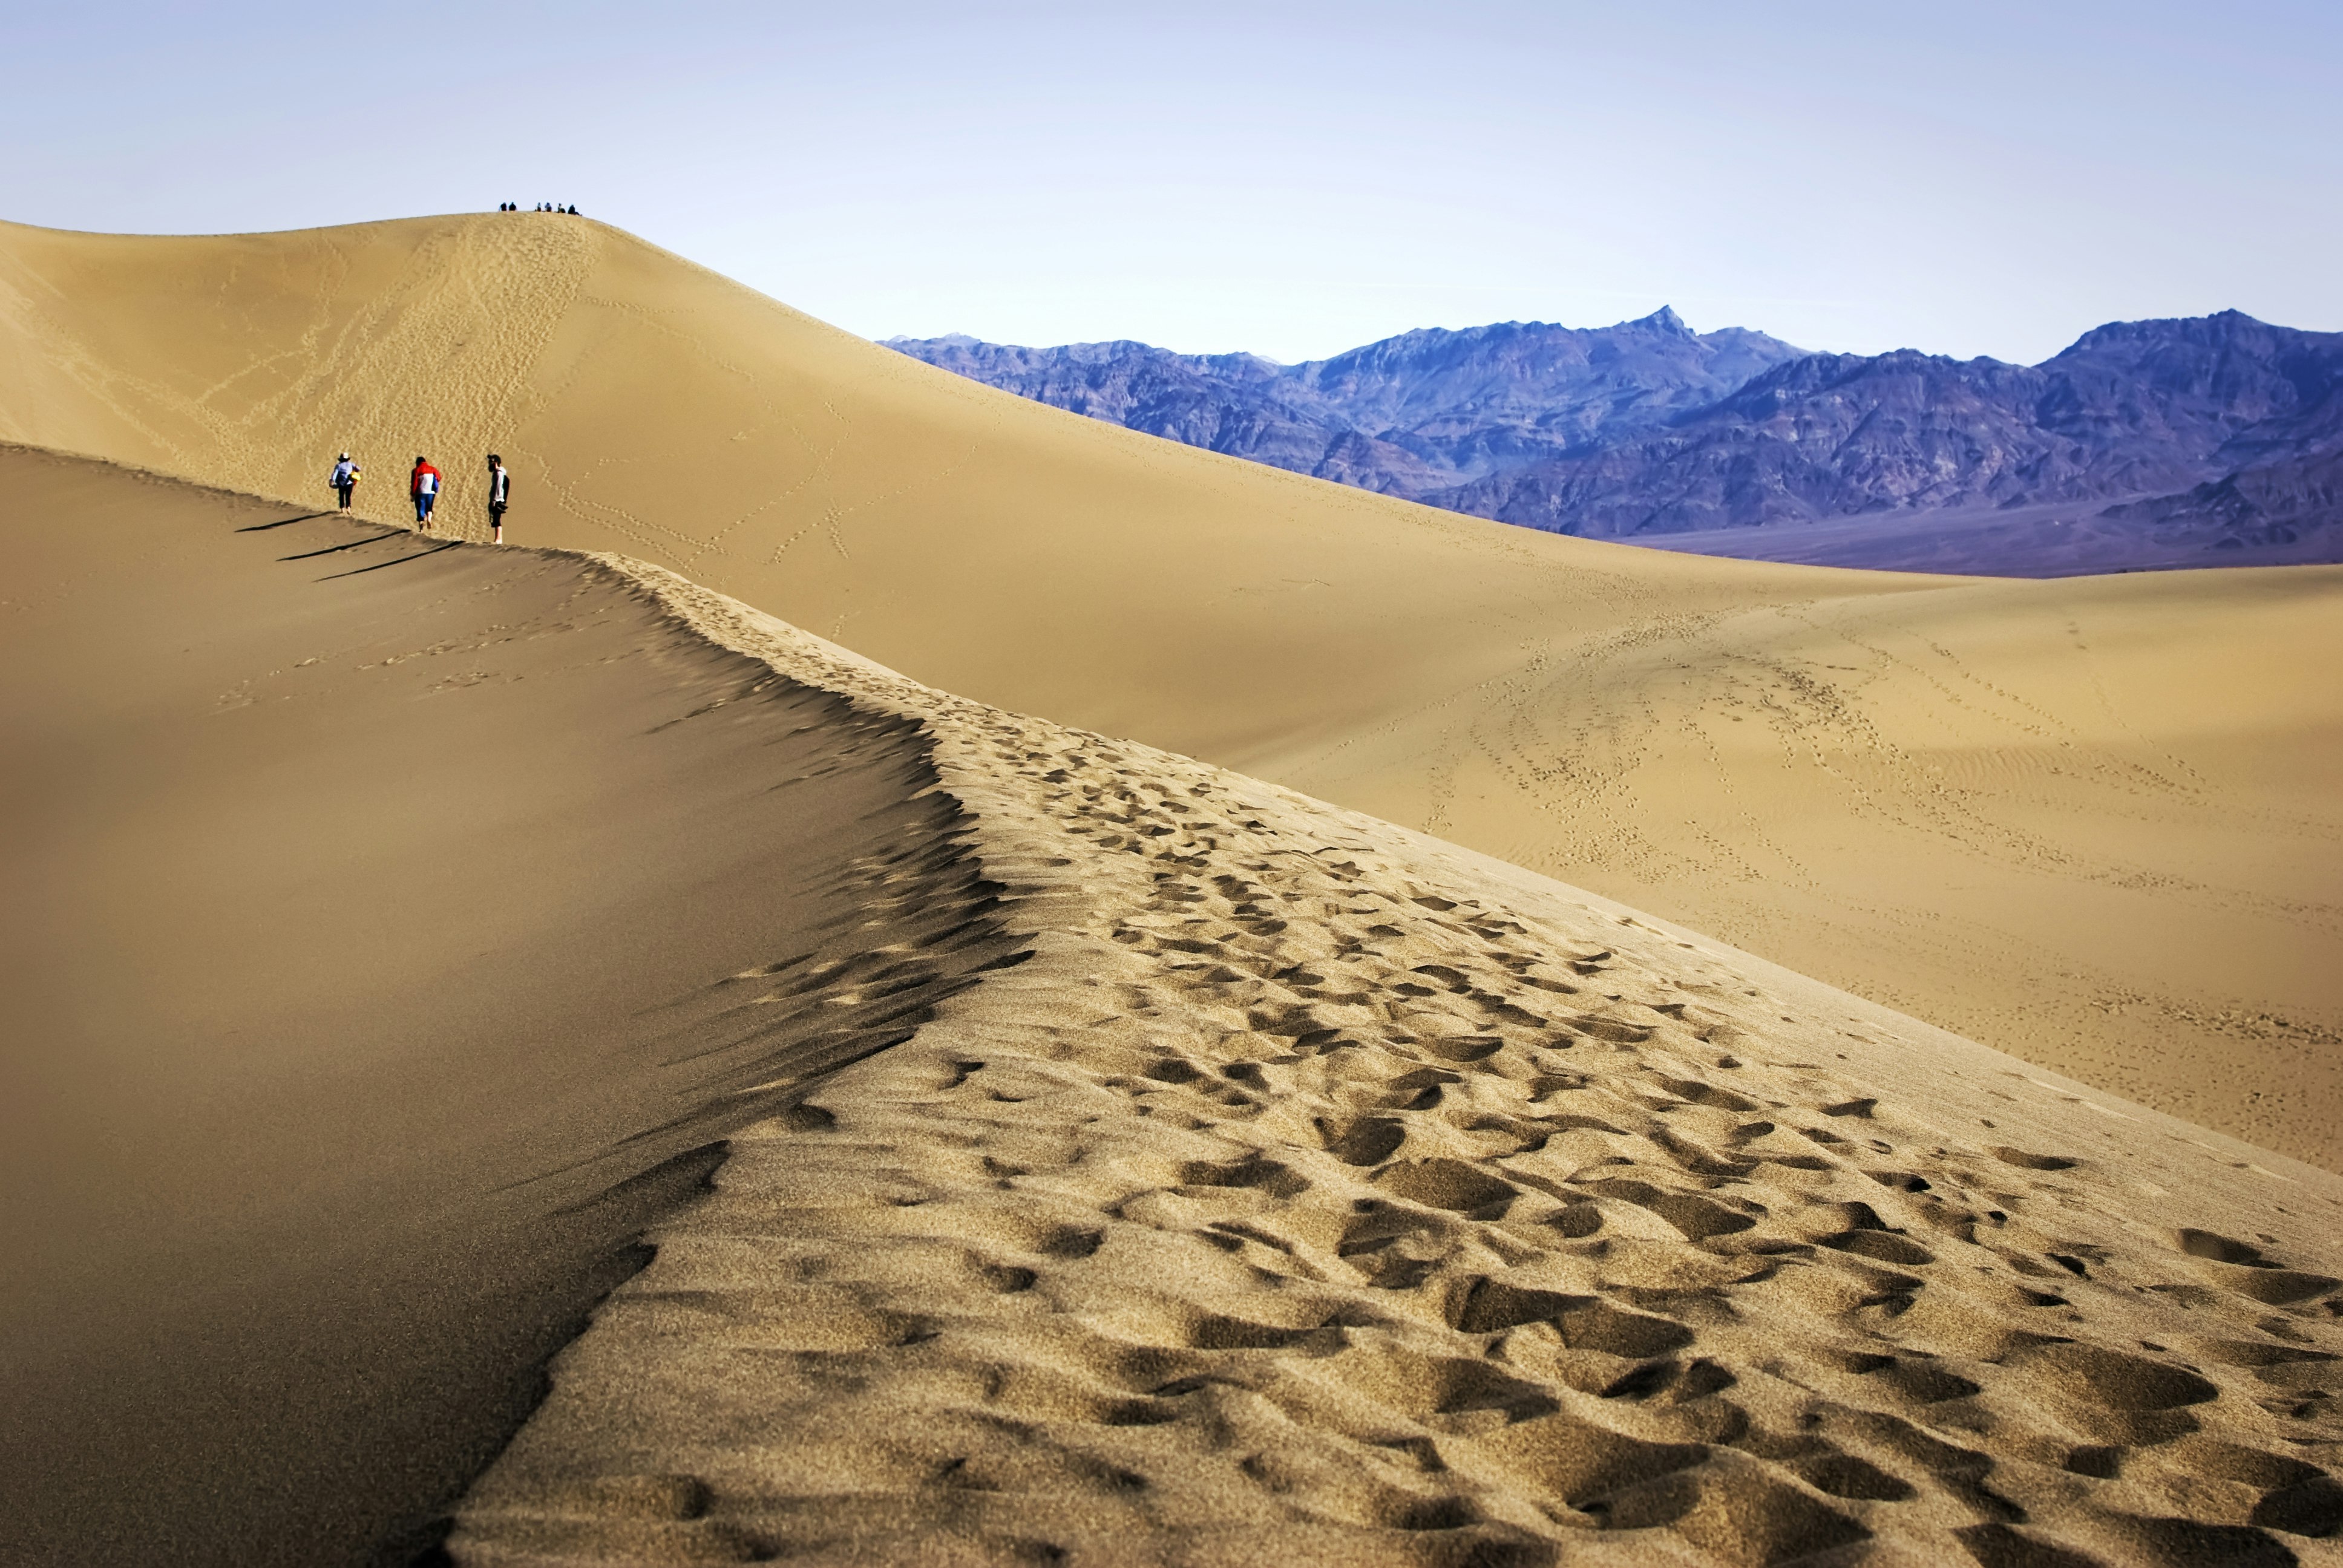 Three hikers walking along a ridge amidst huge sand dunes. Another group of hikers is visible atop another dune in the distance while, beyond, is a craggy mountain range.